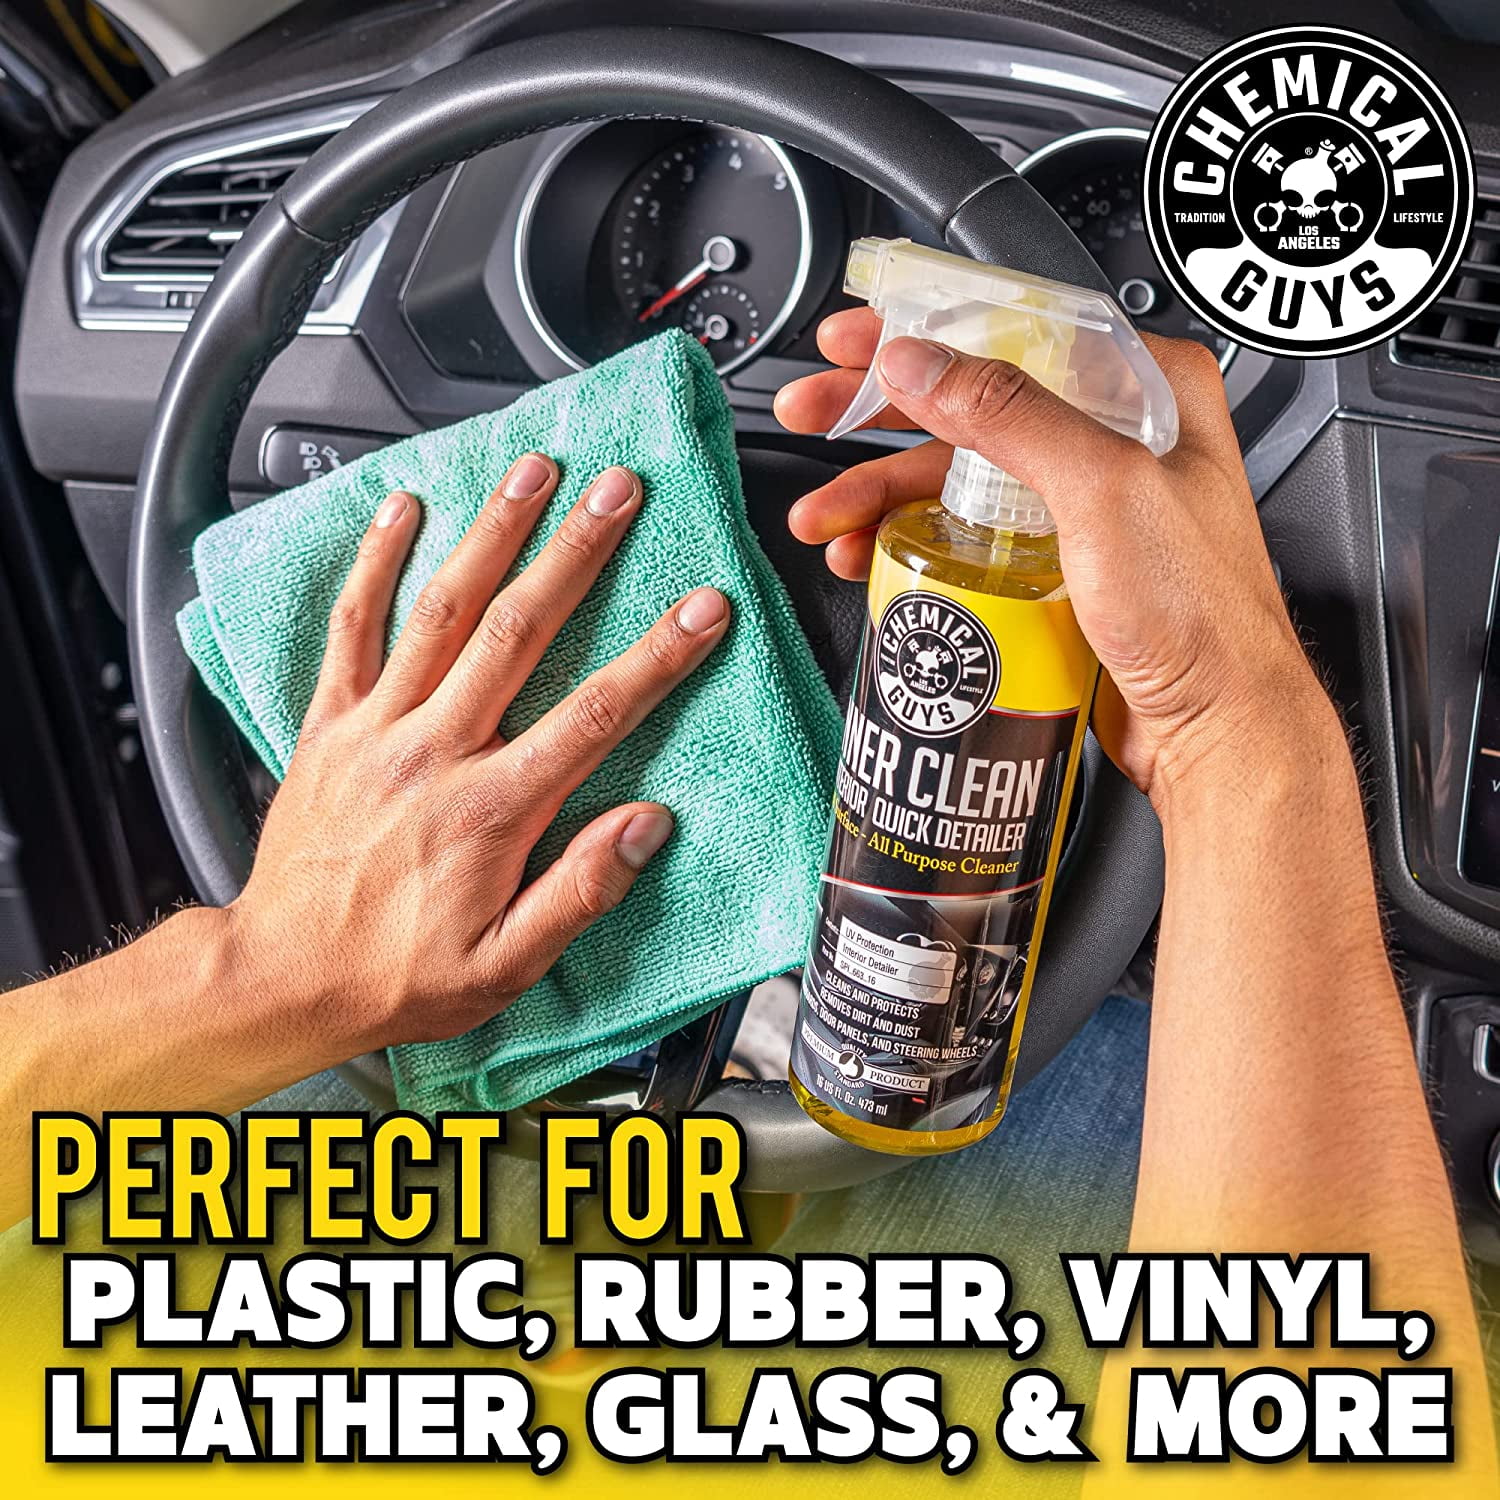 Chemical Guys InnerClean 16oz  Interior Quick Detailer Protectant